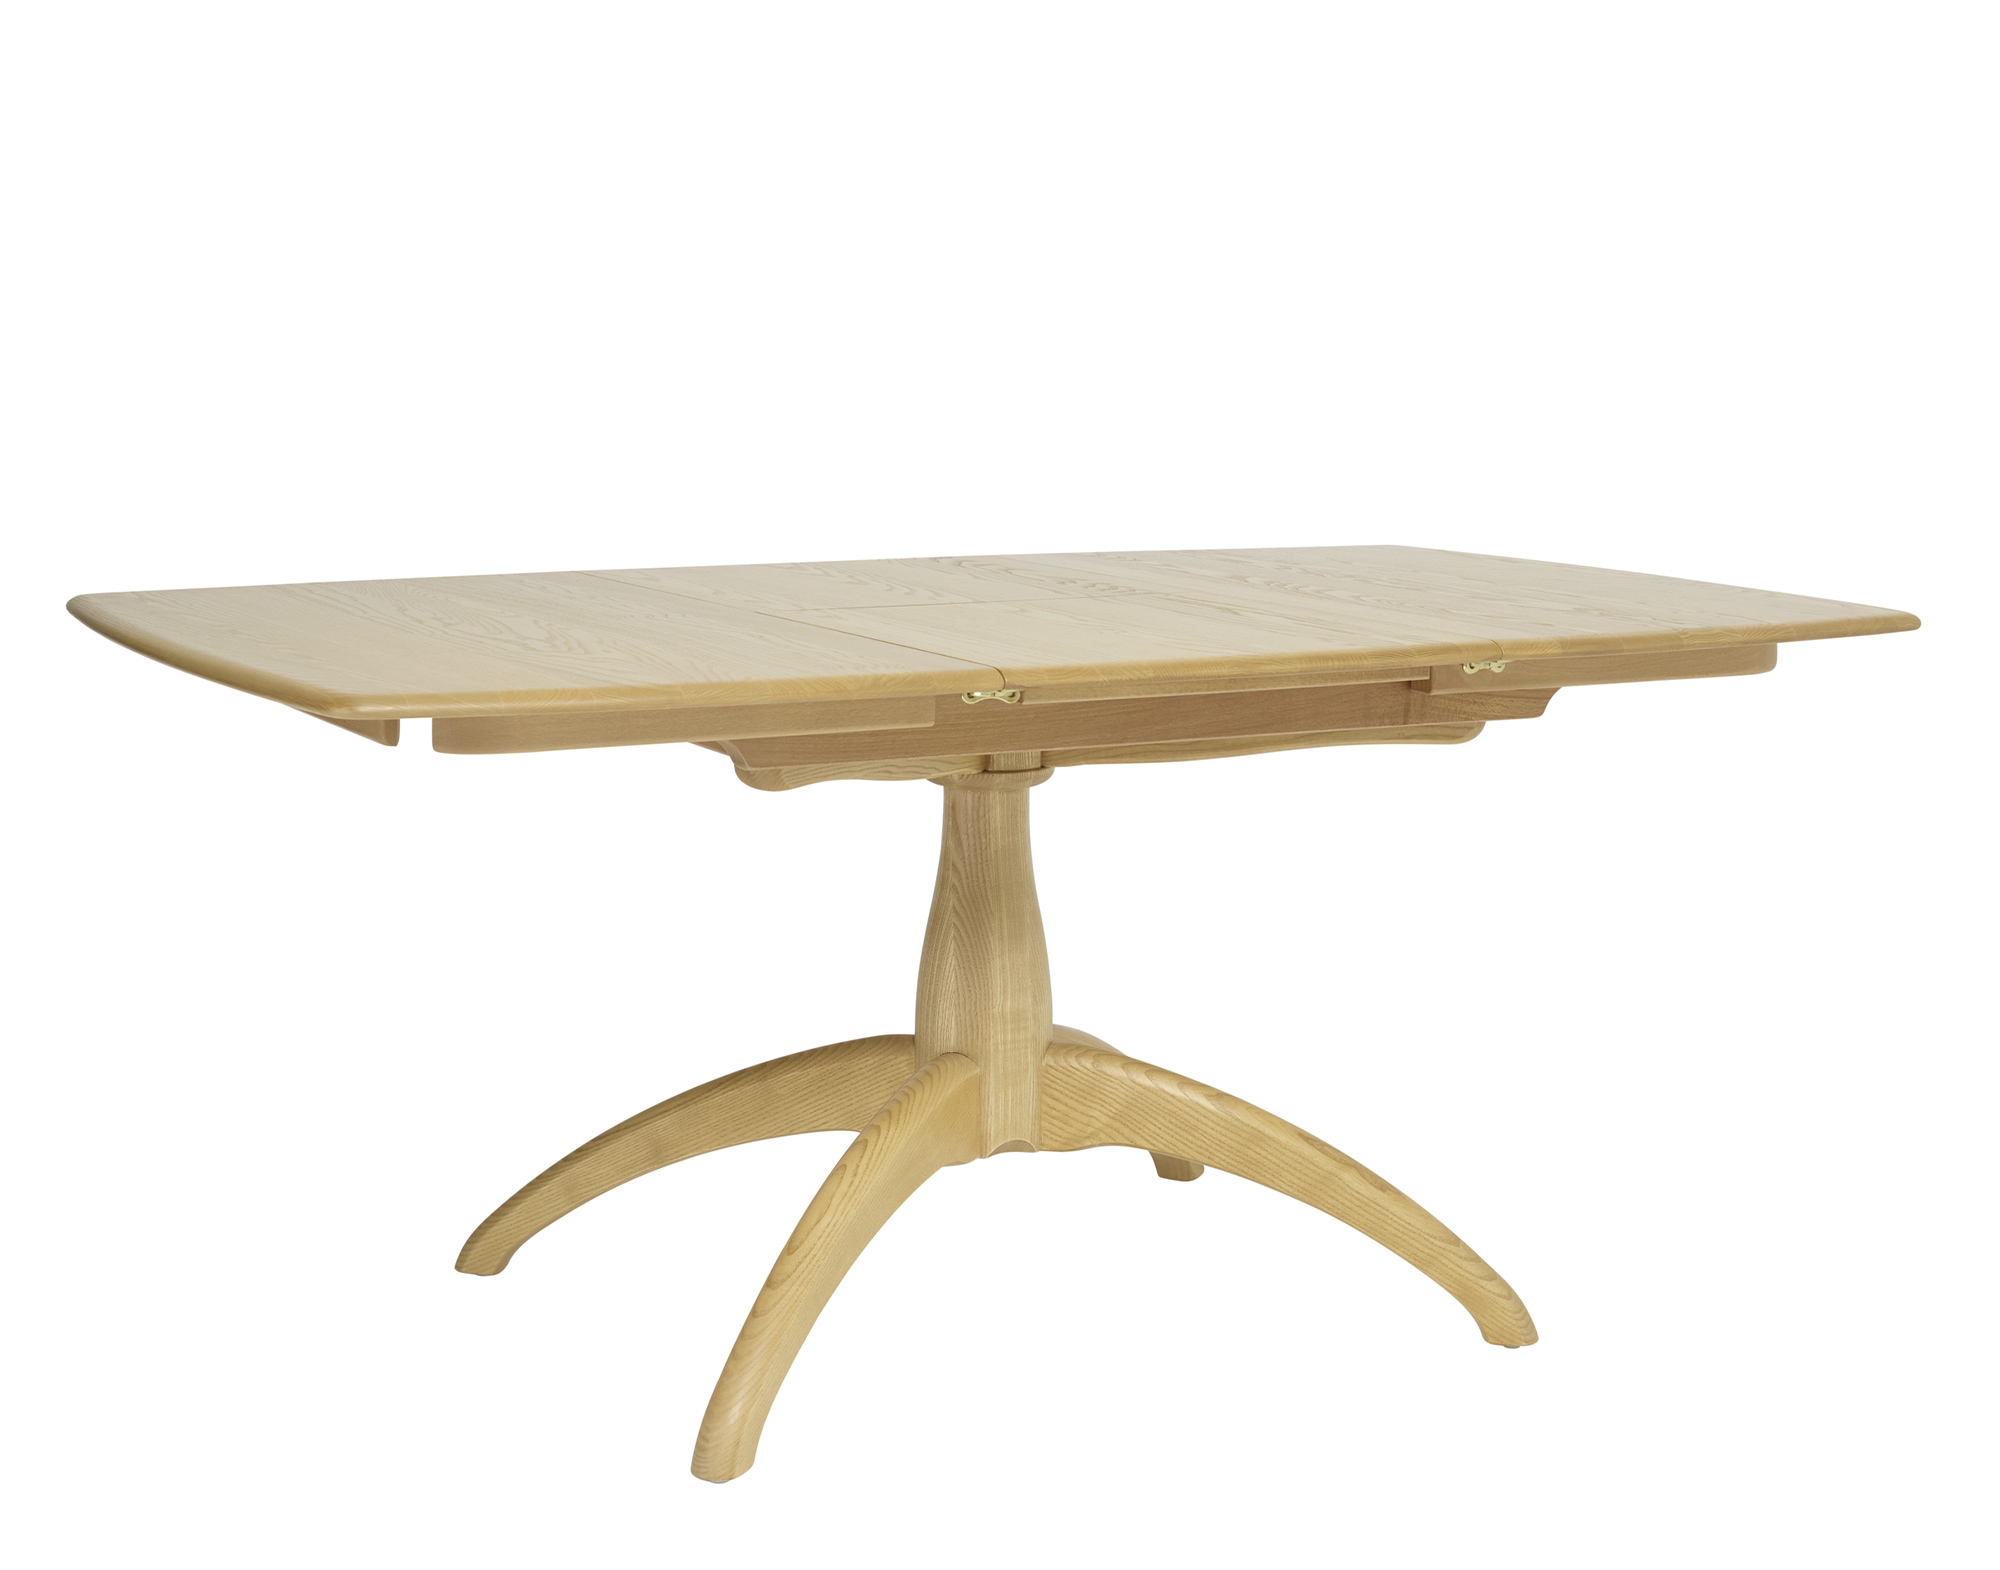 Windsor  1192  small extending dining table  cutoutAngle  2  Ash  ST  Zoom